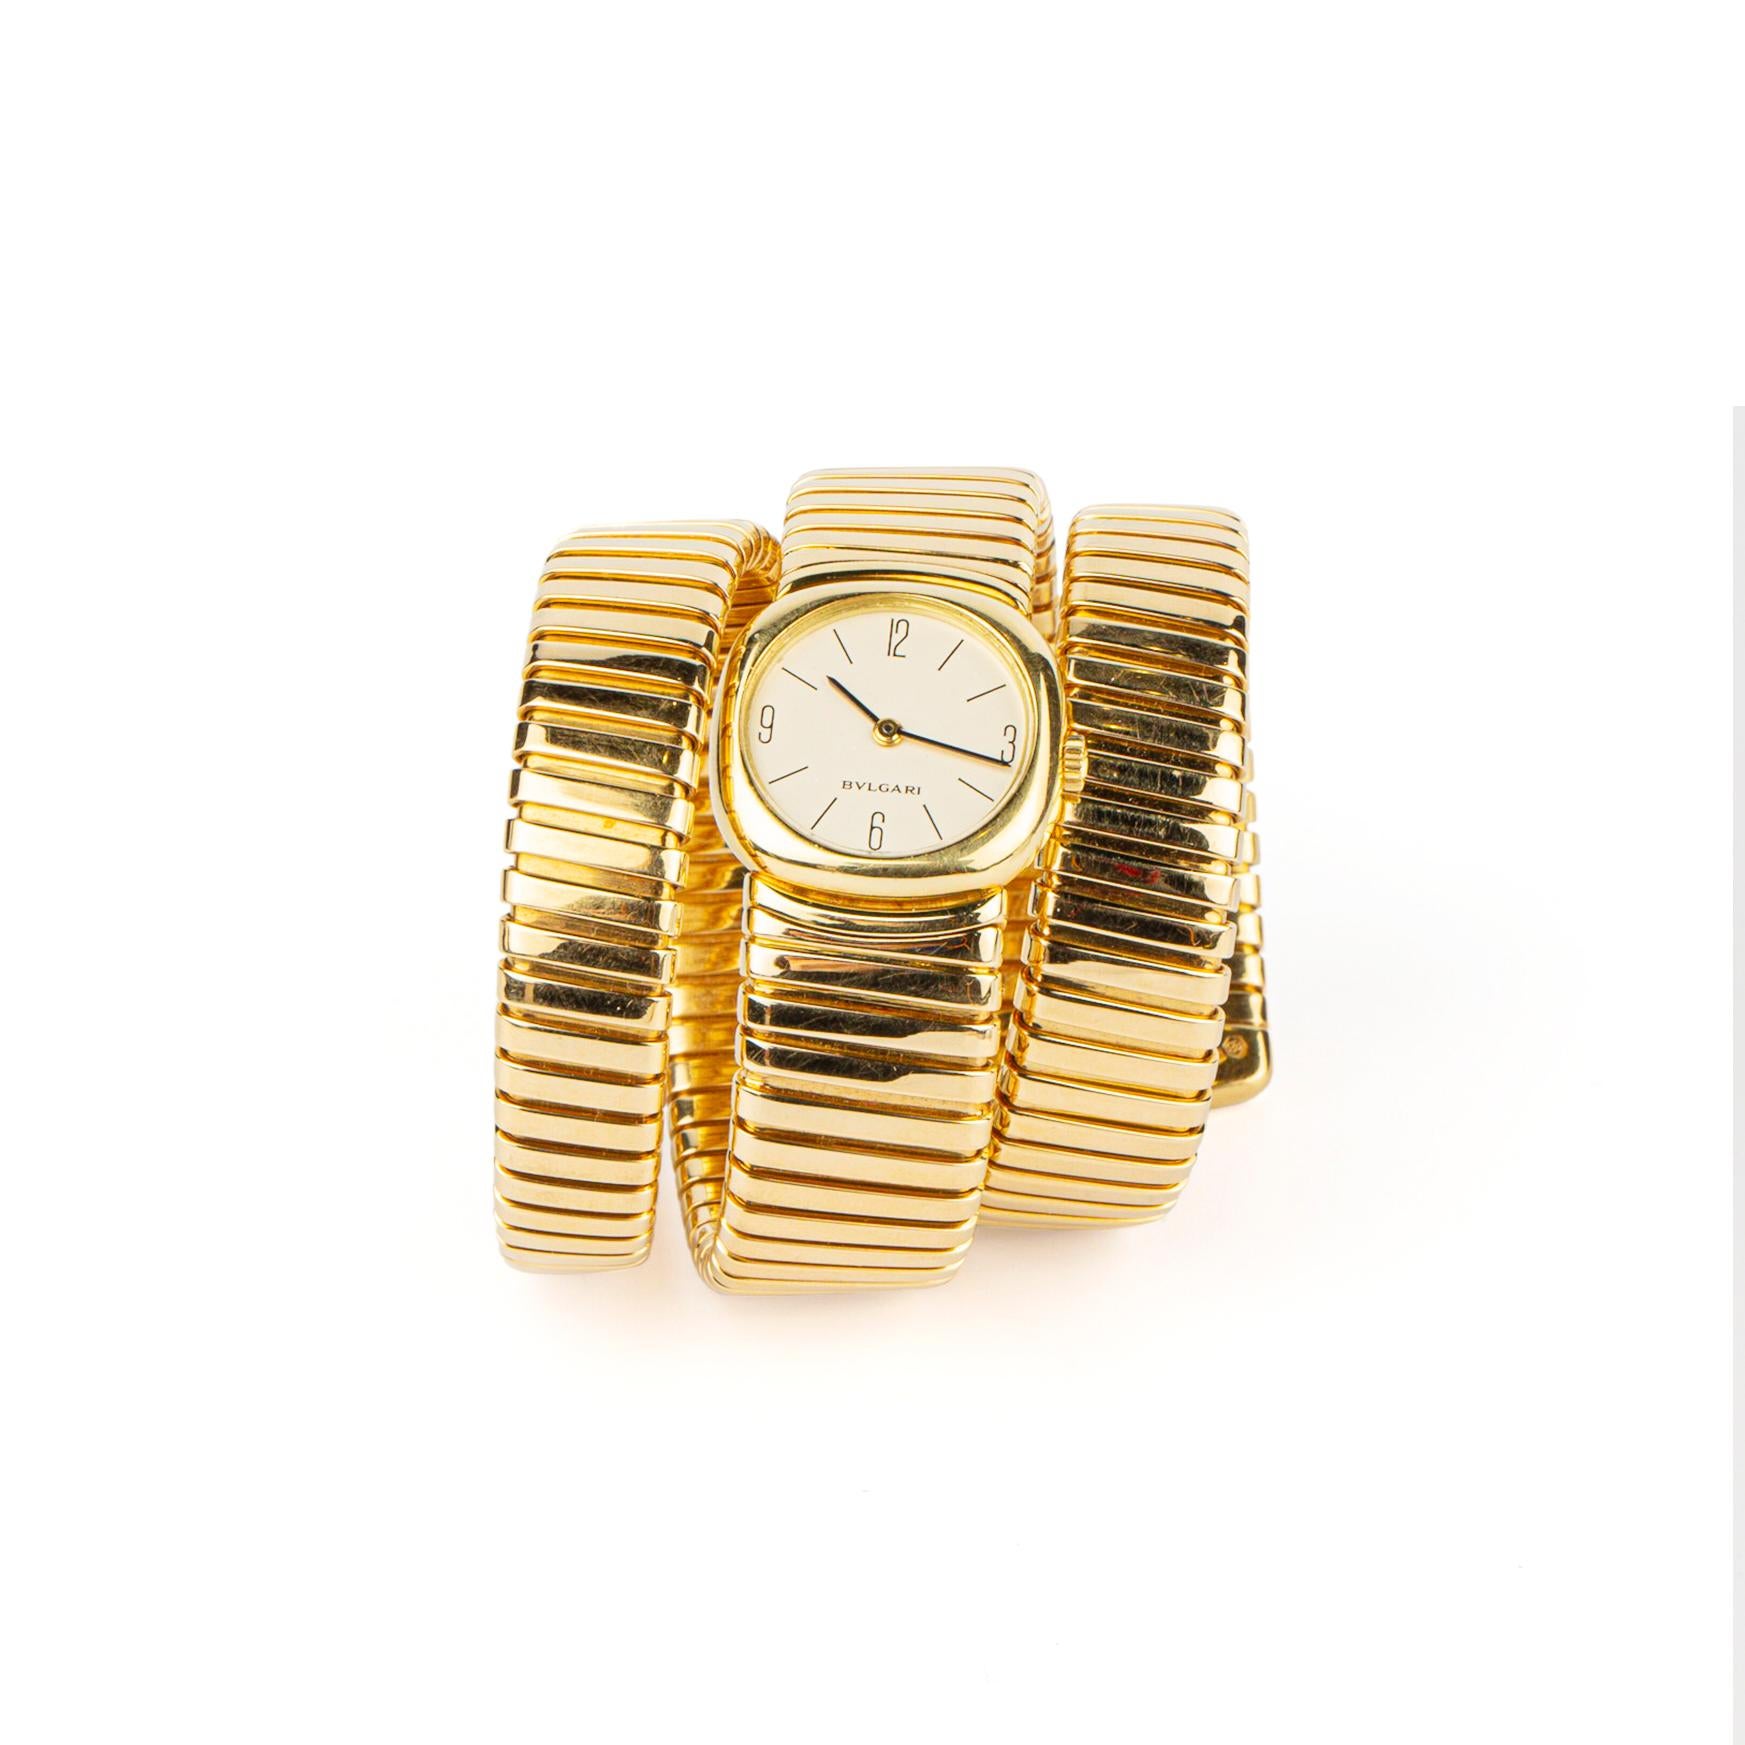 A rare version of the Bulgari 18k Yellow Gold Tubogas Lady’s watch featuring a white central dial. Swiss mechanical movement. Made in Italy, circa 1970.